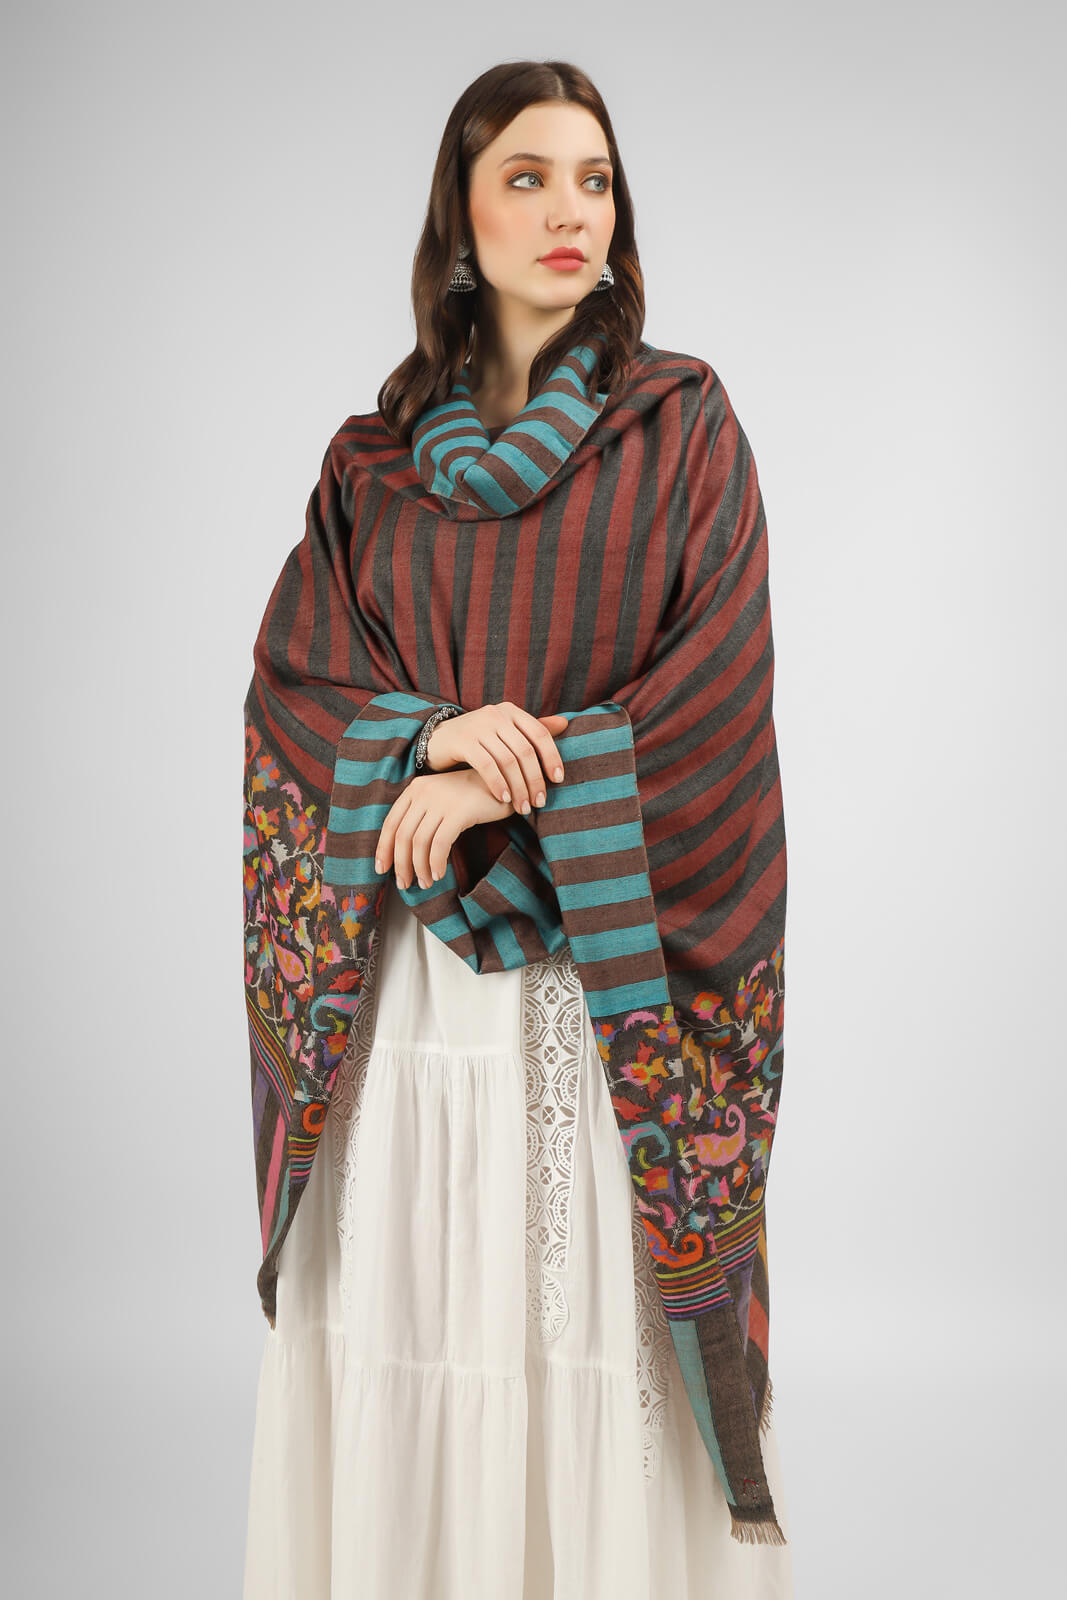 Indulge in the luxury of this handmade in Kashmir, stripe reversible paladaar Kani Pashmina Shawl, featuring beautiful designs in floral and paisley patterns crafted by expert and skillful artisans. Stay warm and cozy while looking stylish in this luxurious and warm shawl.